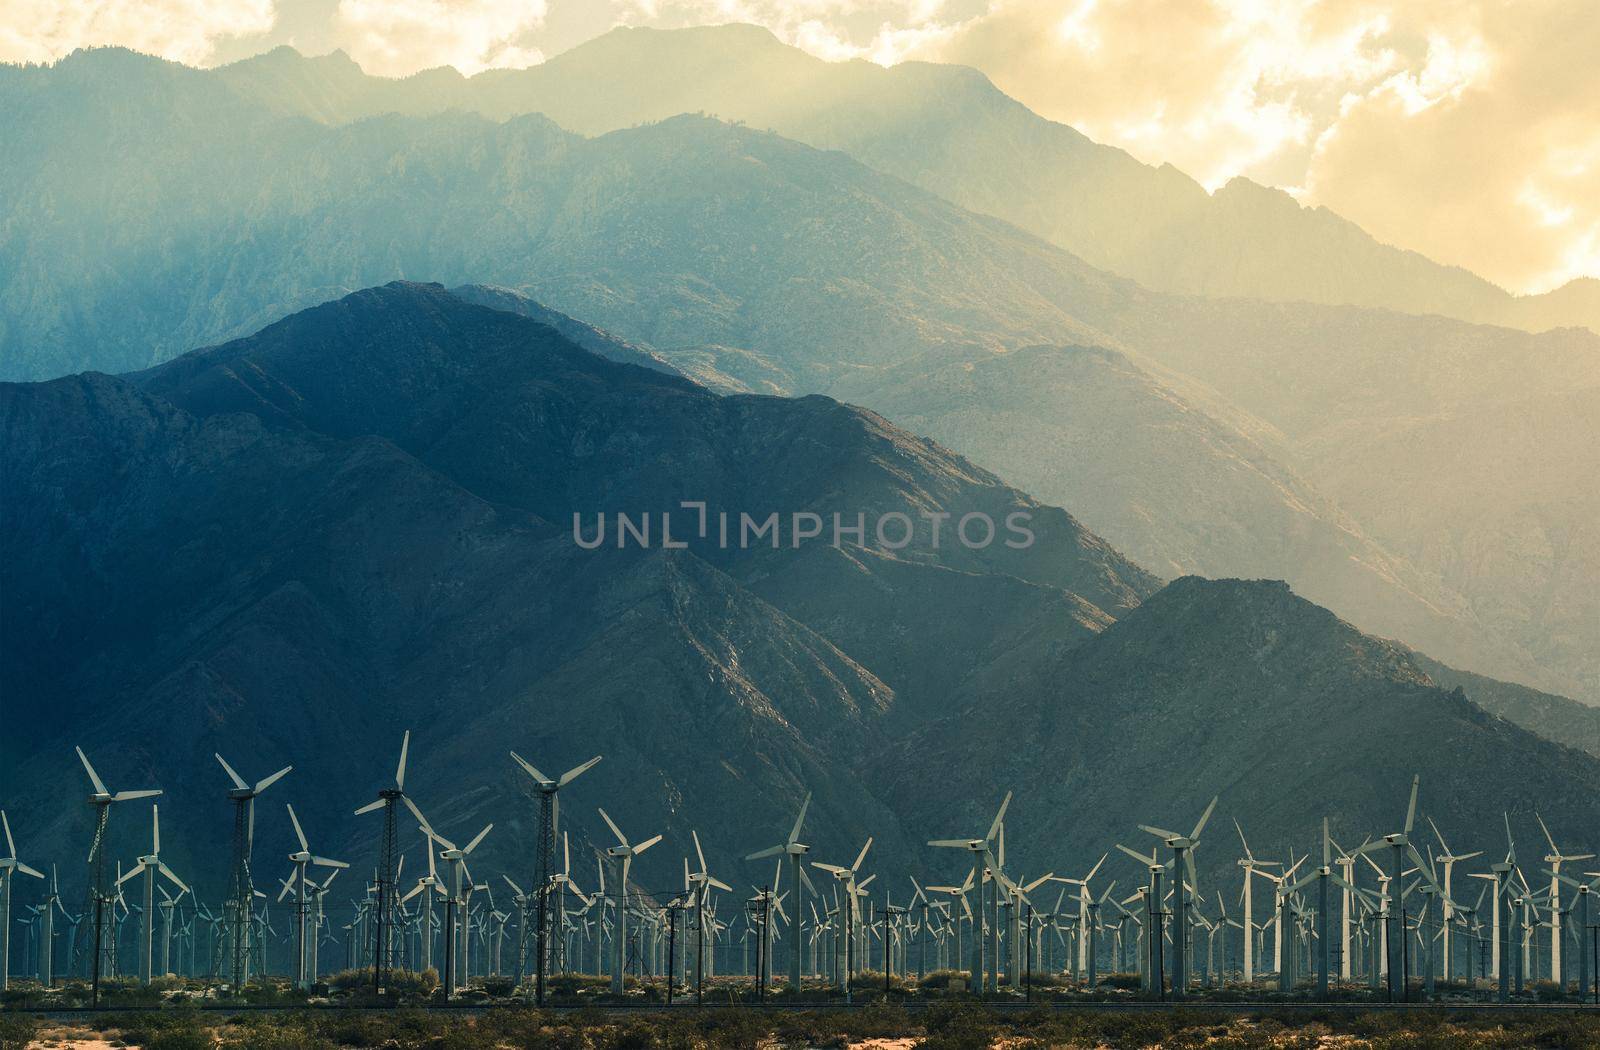 California Desert Wind Turbines in Coachella Valley. Scenic Mountains and Sun Light. California, United States. by welcomia